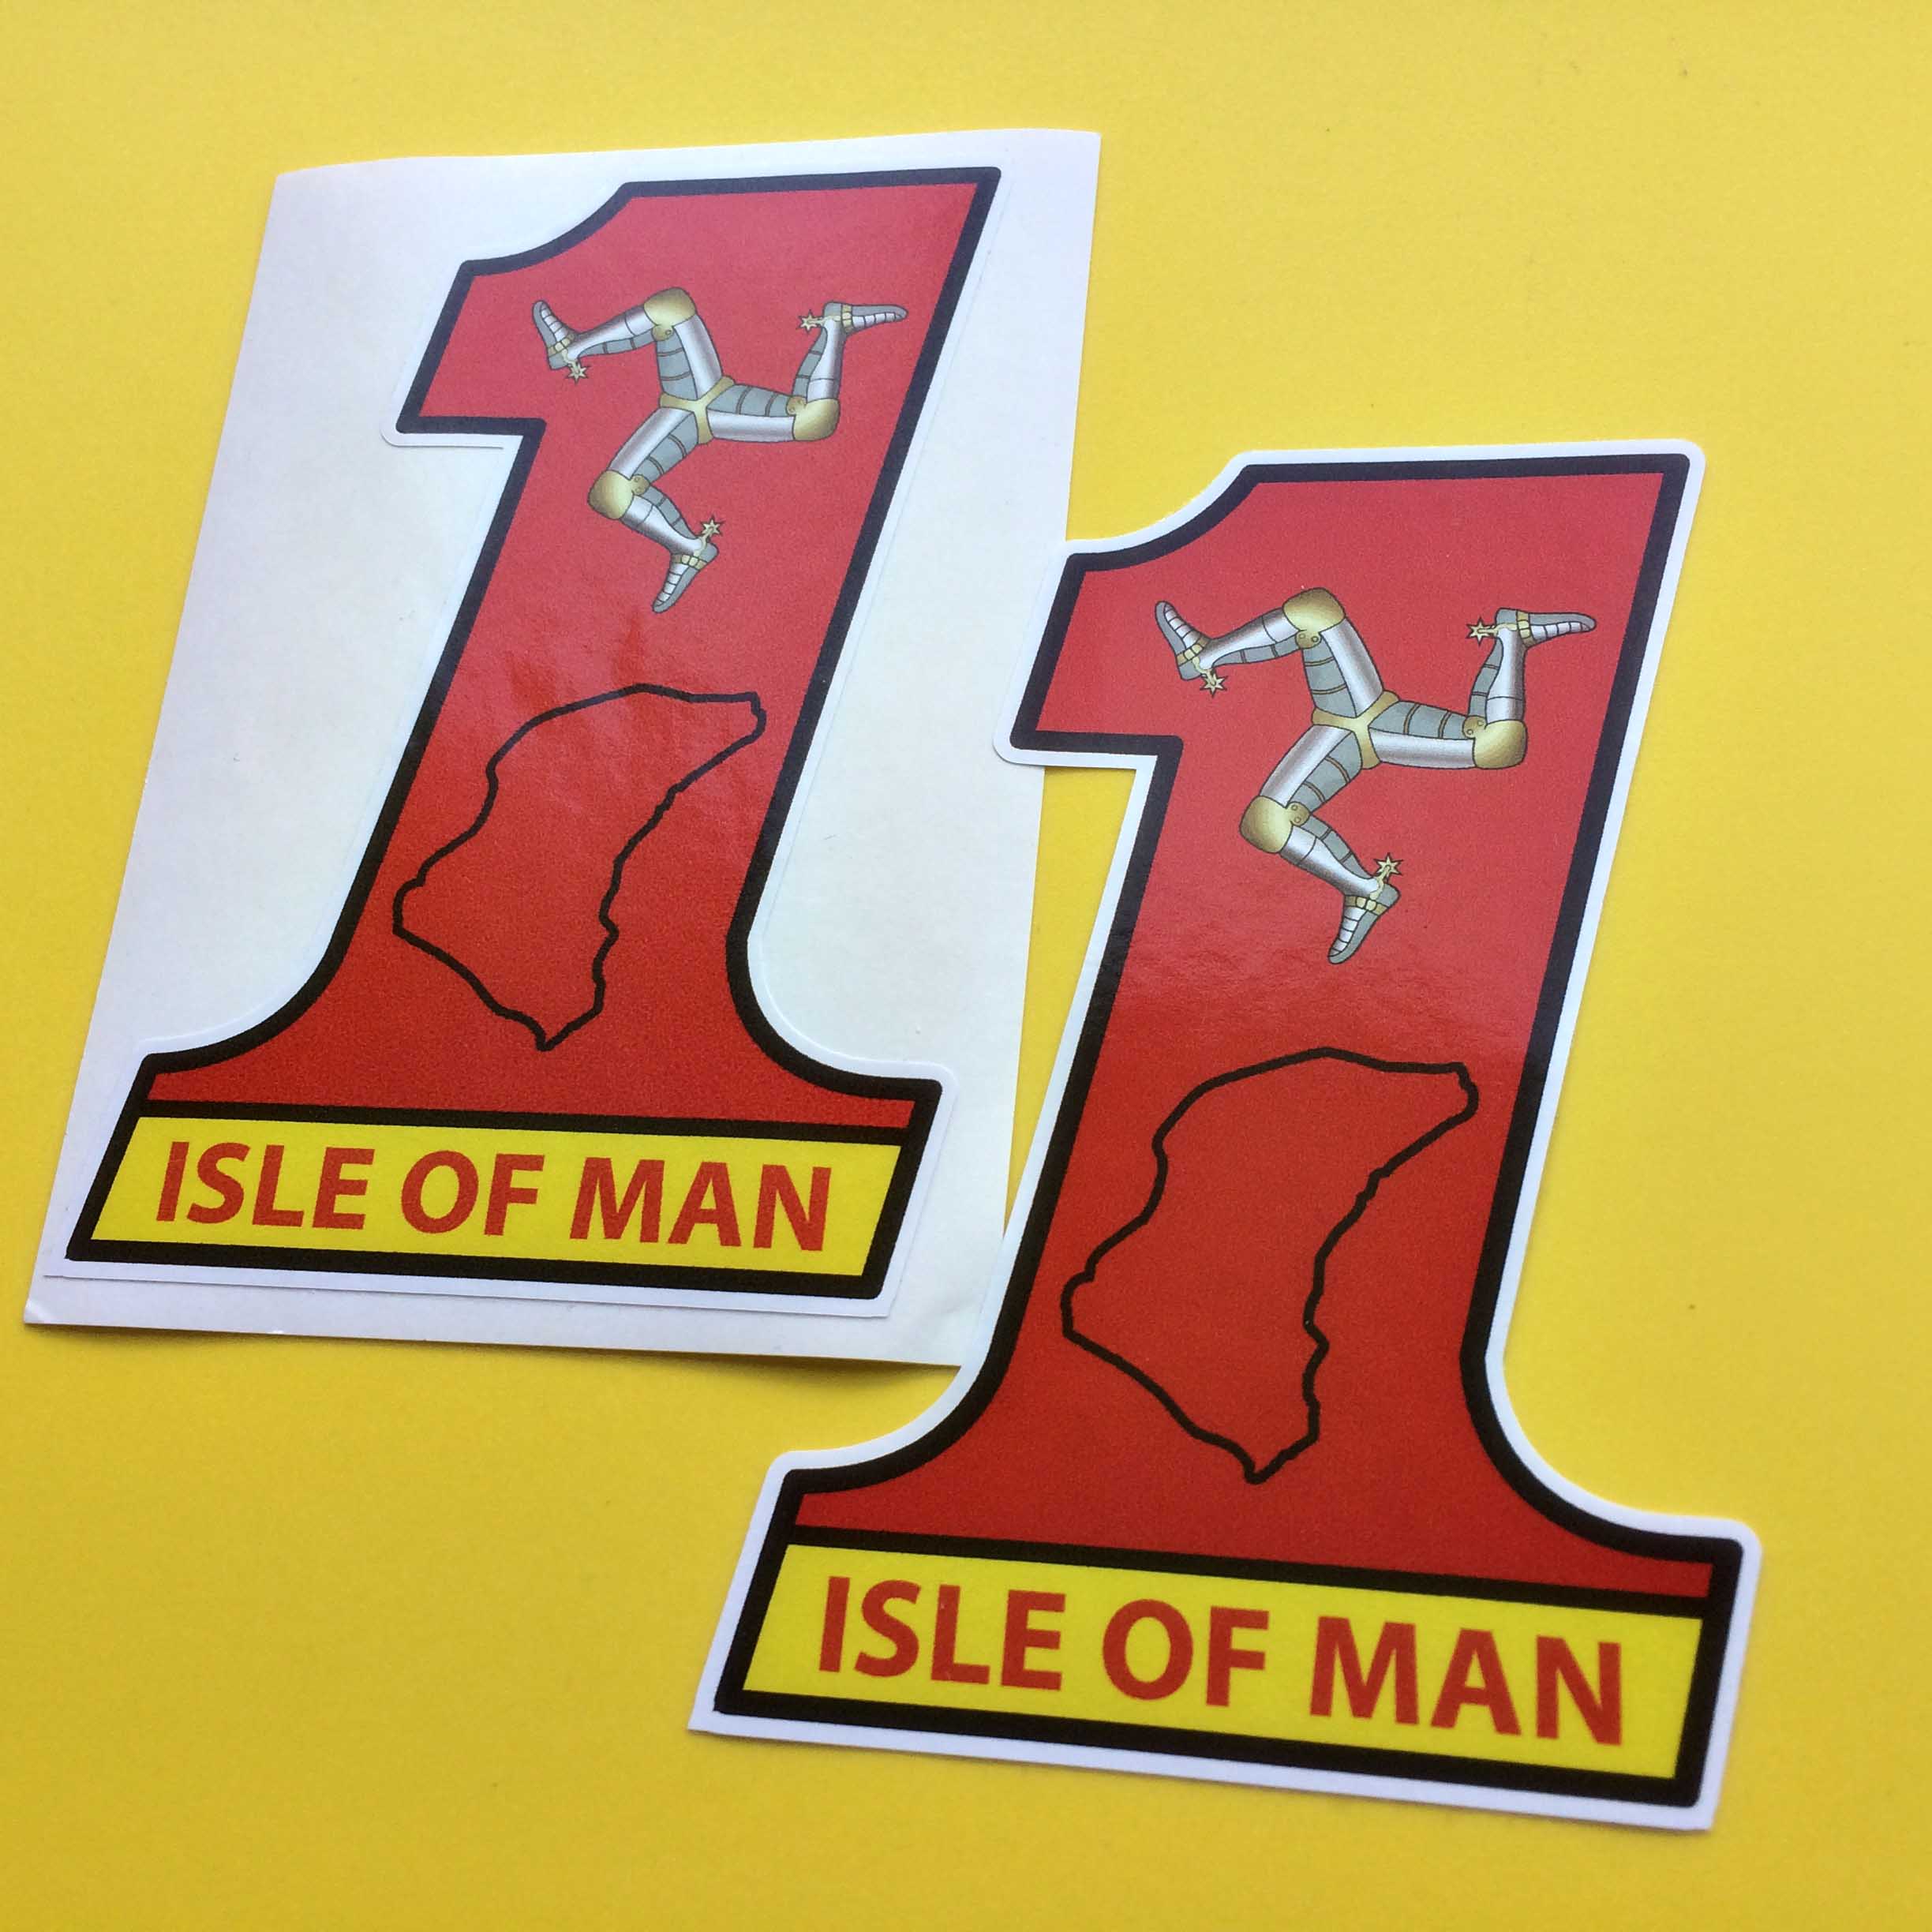 ISLE OF MAN NO 1 TT STICKERS. Isle of Man in red lettering on a yellow background at the base of a number 1 in red. Additional images of the Manx triskelion in silver and gold and a contour in black of the Isle of Man.